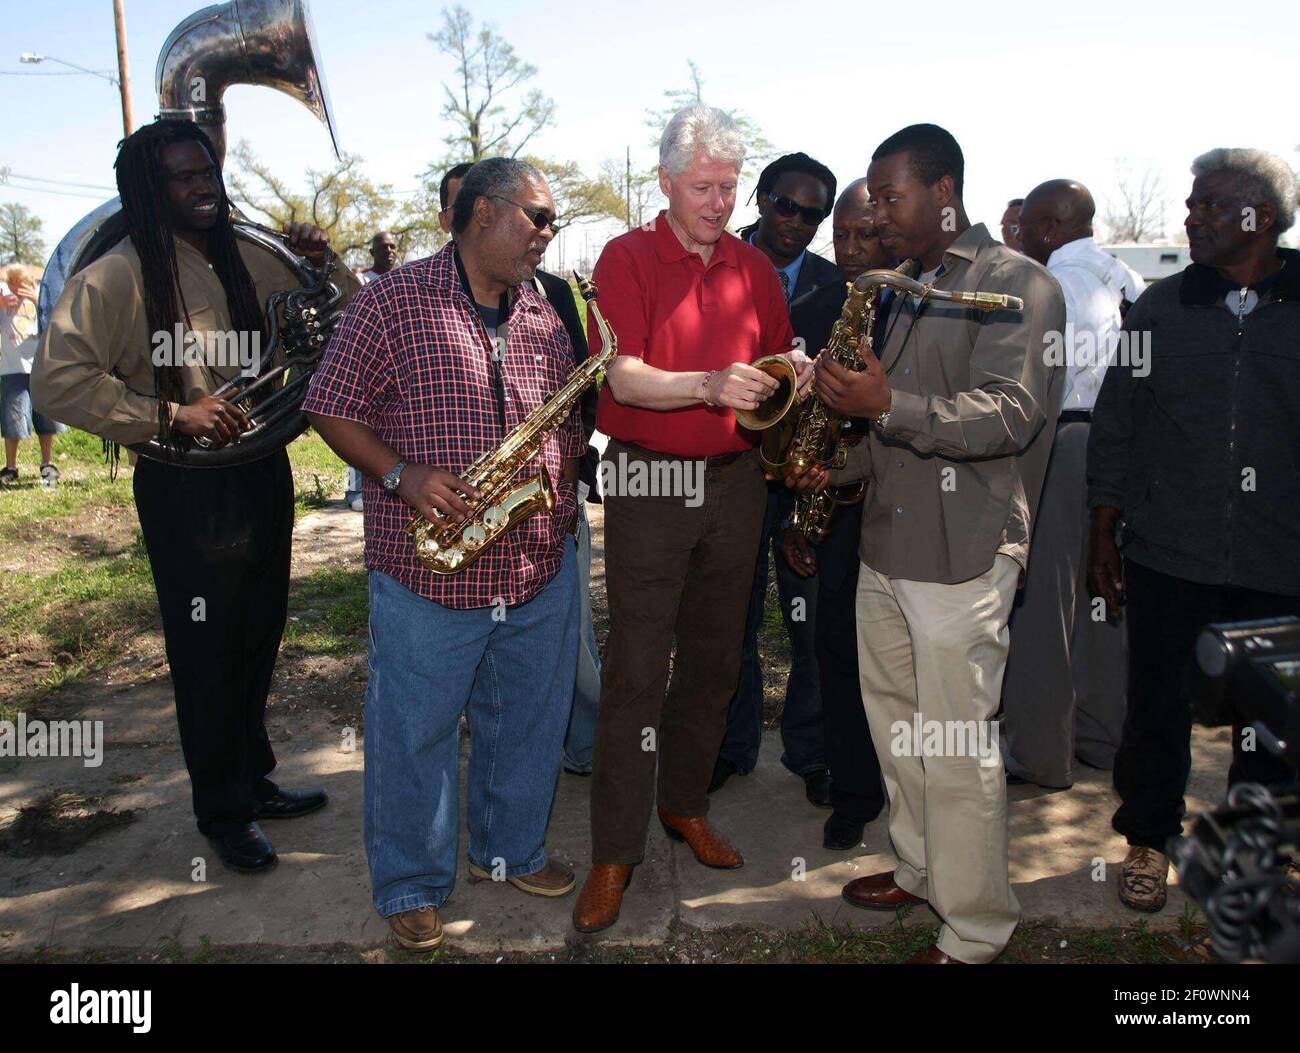 16 March 2008 - New Orleans, Louisiana, Lower 9th ward - Former President Bill Clinton talks saxophones and enjoys a rousing performance by the Lucky 8 Brass Band before he leaves the area. Clinton was in town for the 'Make a Difference, Make a Commitment' clean up of the neighbourhood devastated by Hurricane Katrina. The massive clean up project was organised by Brad Pitt's Make it Right Foundation aided by the Clinton Global Initiative. Photo Credit: Charlie Varley/Sipa Press/pittclintonone.026/0803171349 Stock Photo